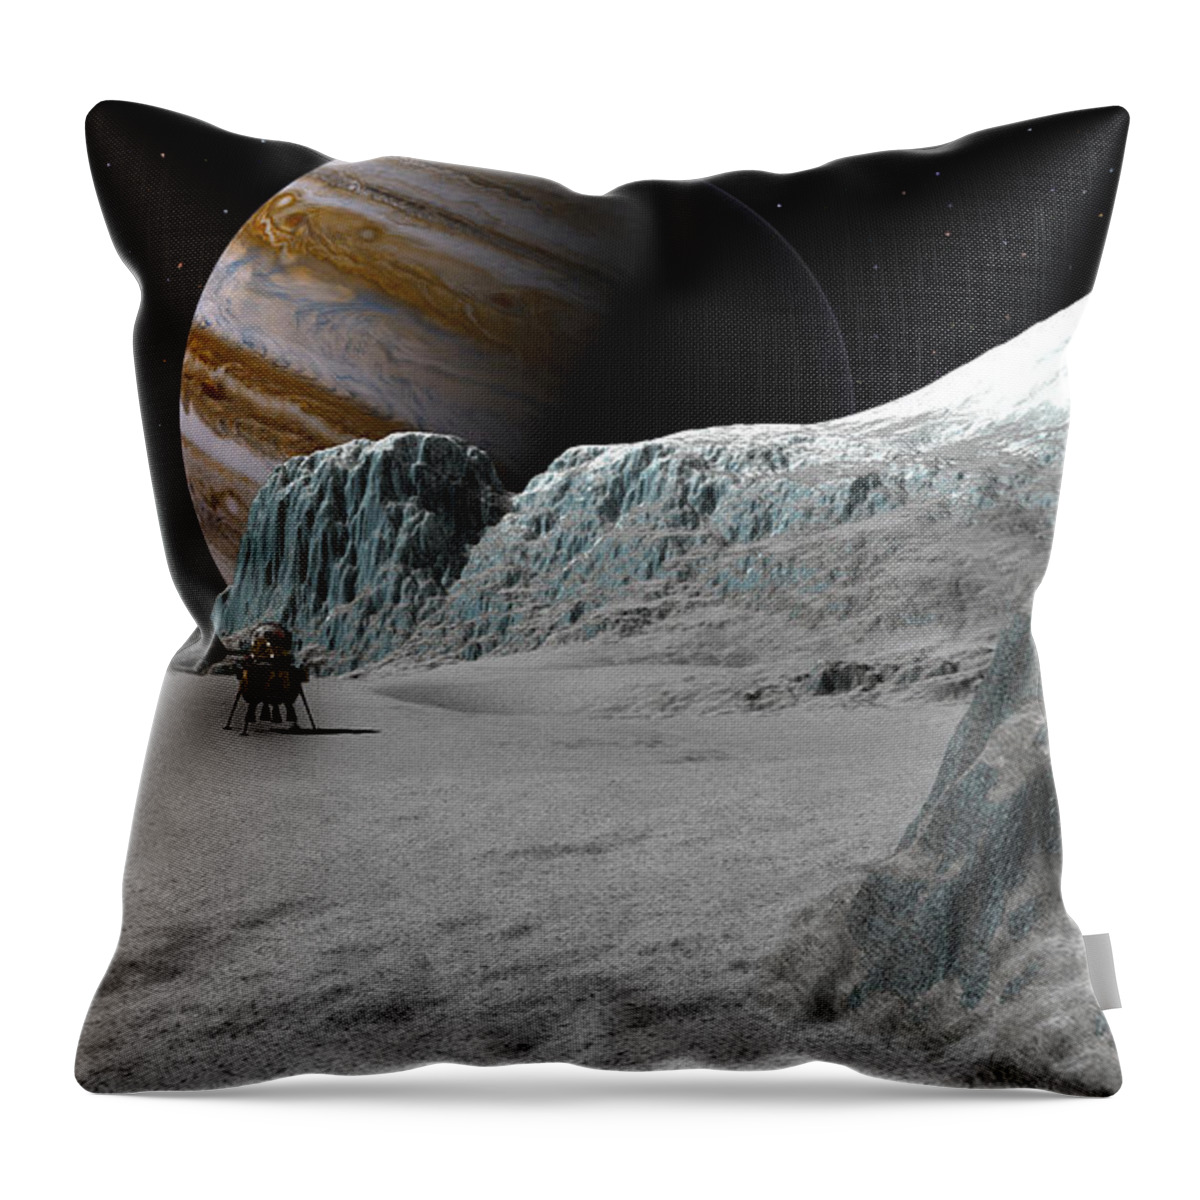 Spaceship Throw Pillow featuring the digital art Lander Ulysses on Europa #1 by David Robinson